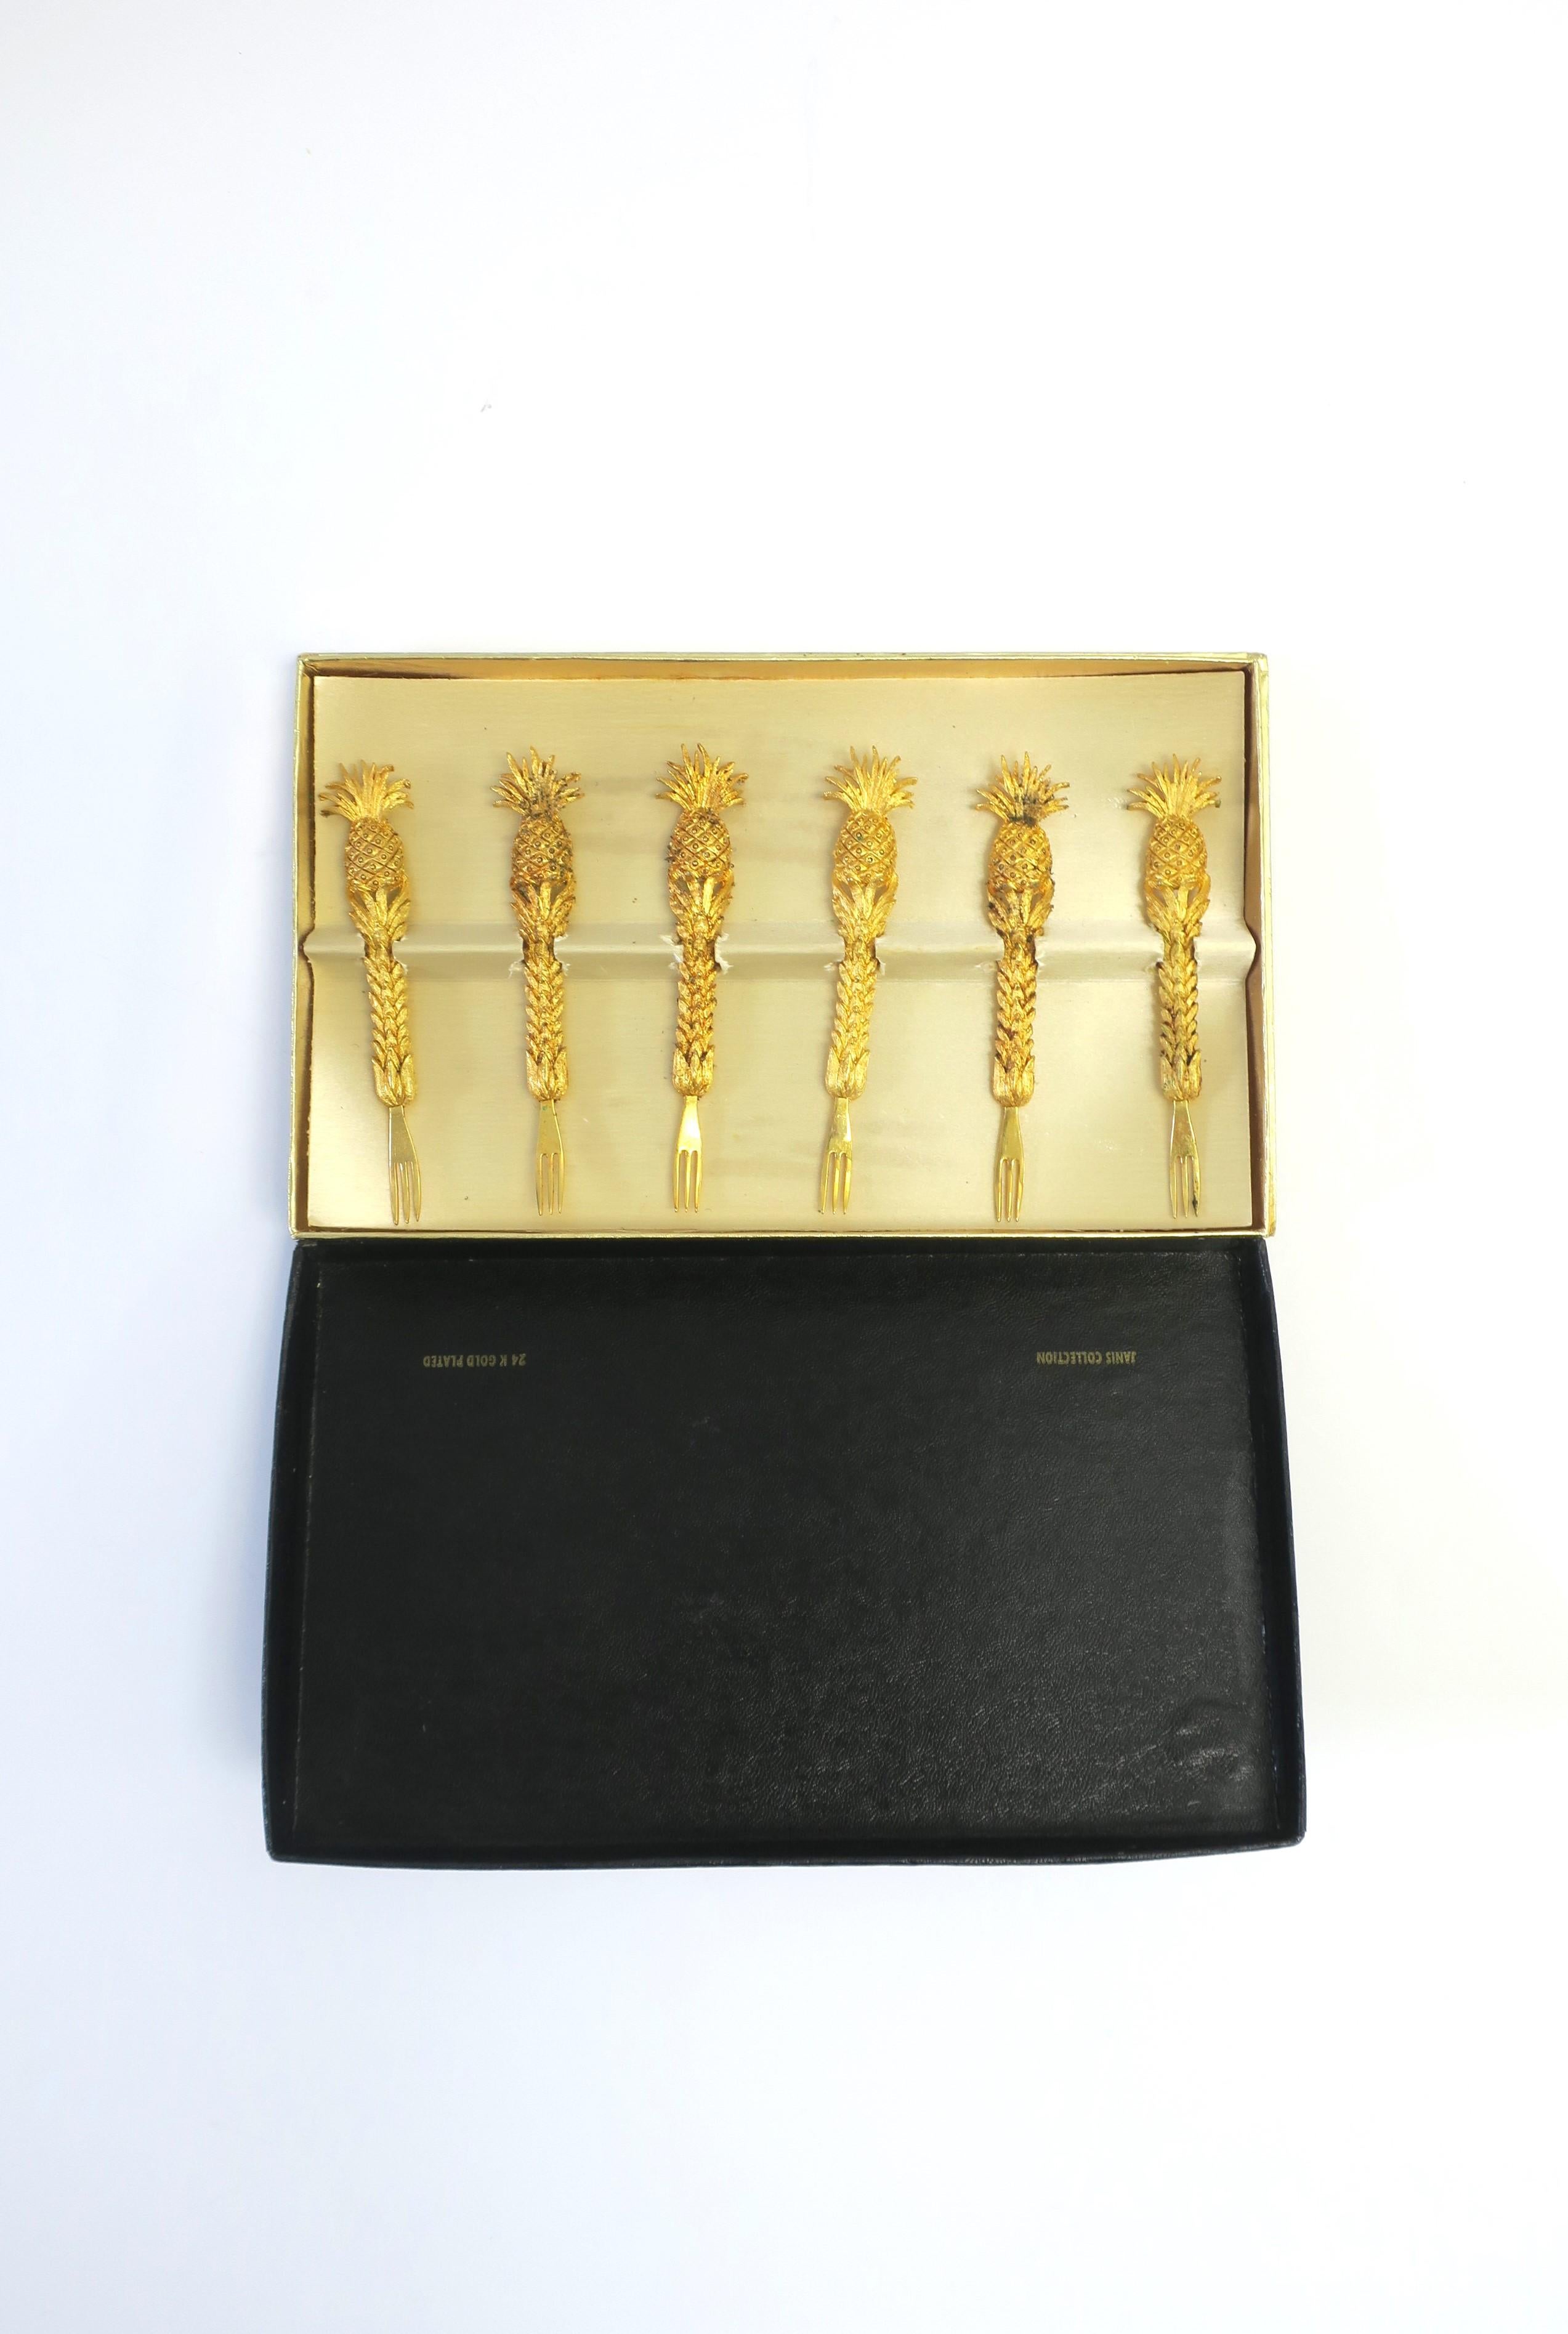 Two box sets of six (6) available. Each box sold separately as per listing. 

A substantial set of six (6) 24kt gold plated appetizer, canapé, or hor d'oeuvres forks with pineapple design, circa 1960s. A beautiful set for entertaining/dining, etc.